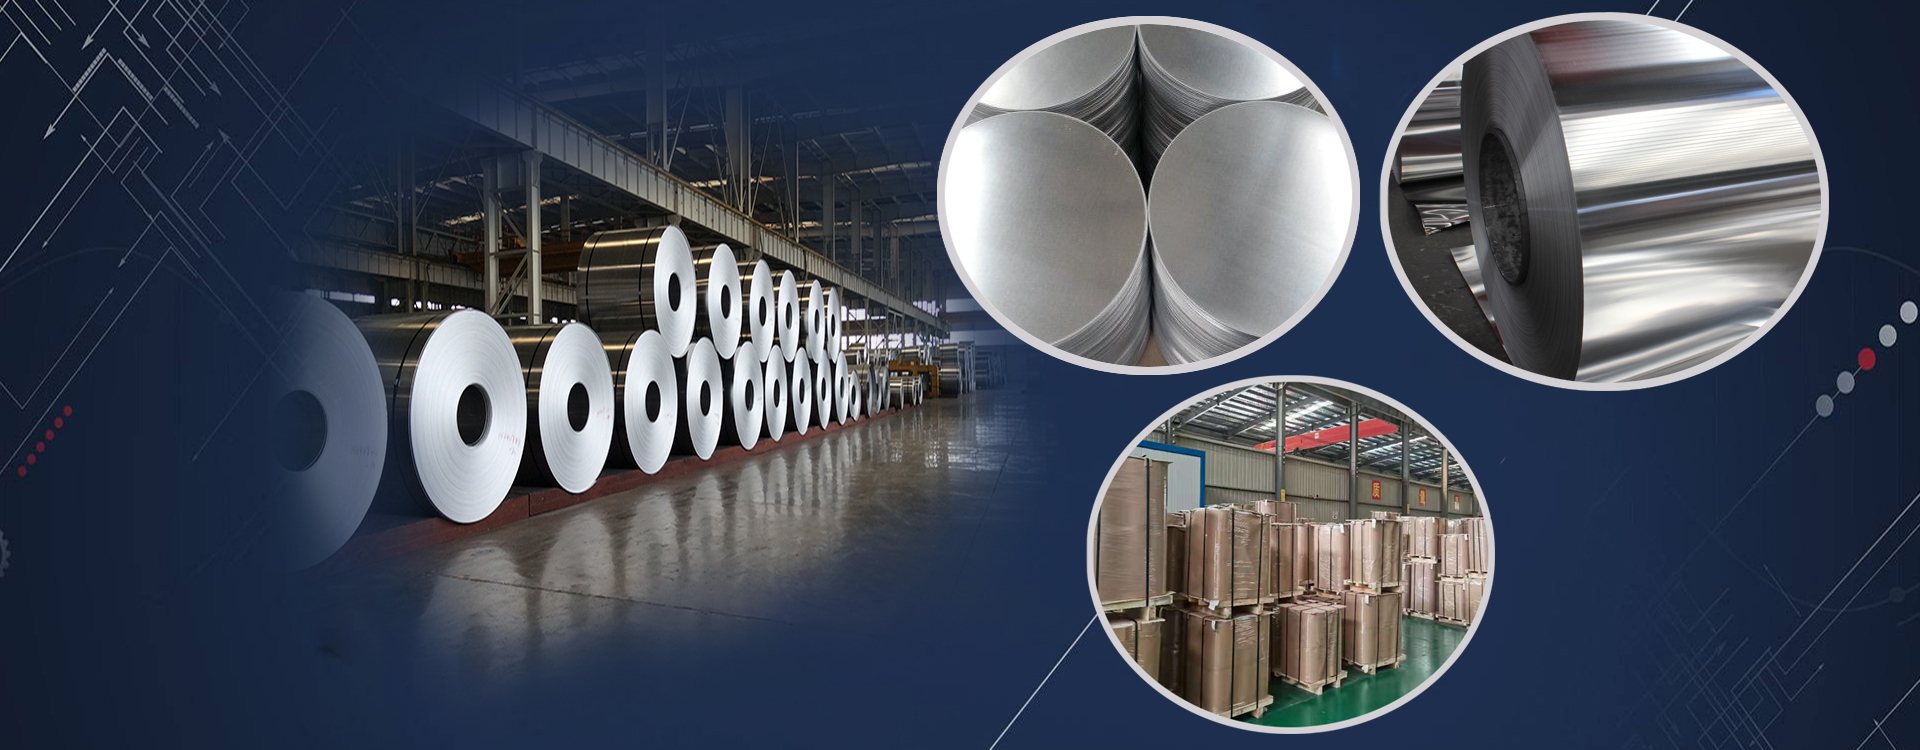 Widely Used, Eco-Friendly Aluminium Flashing Roll For Industrial